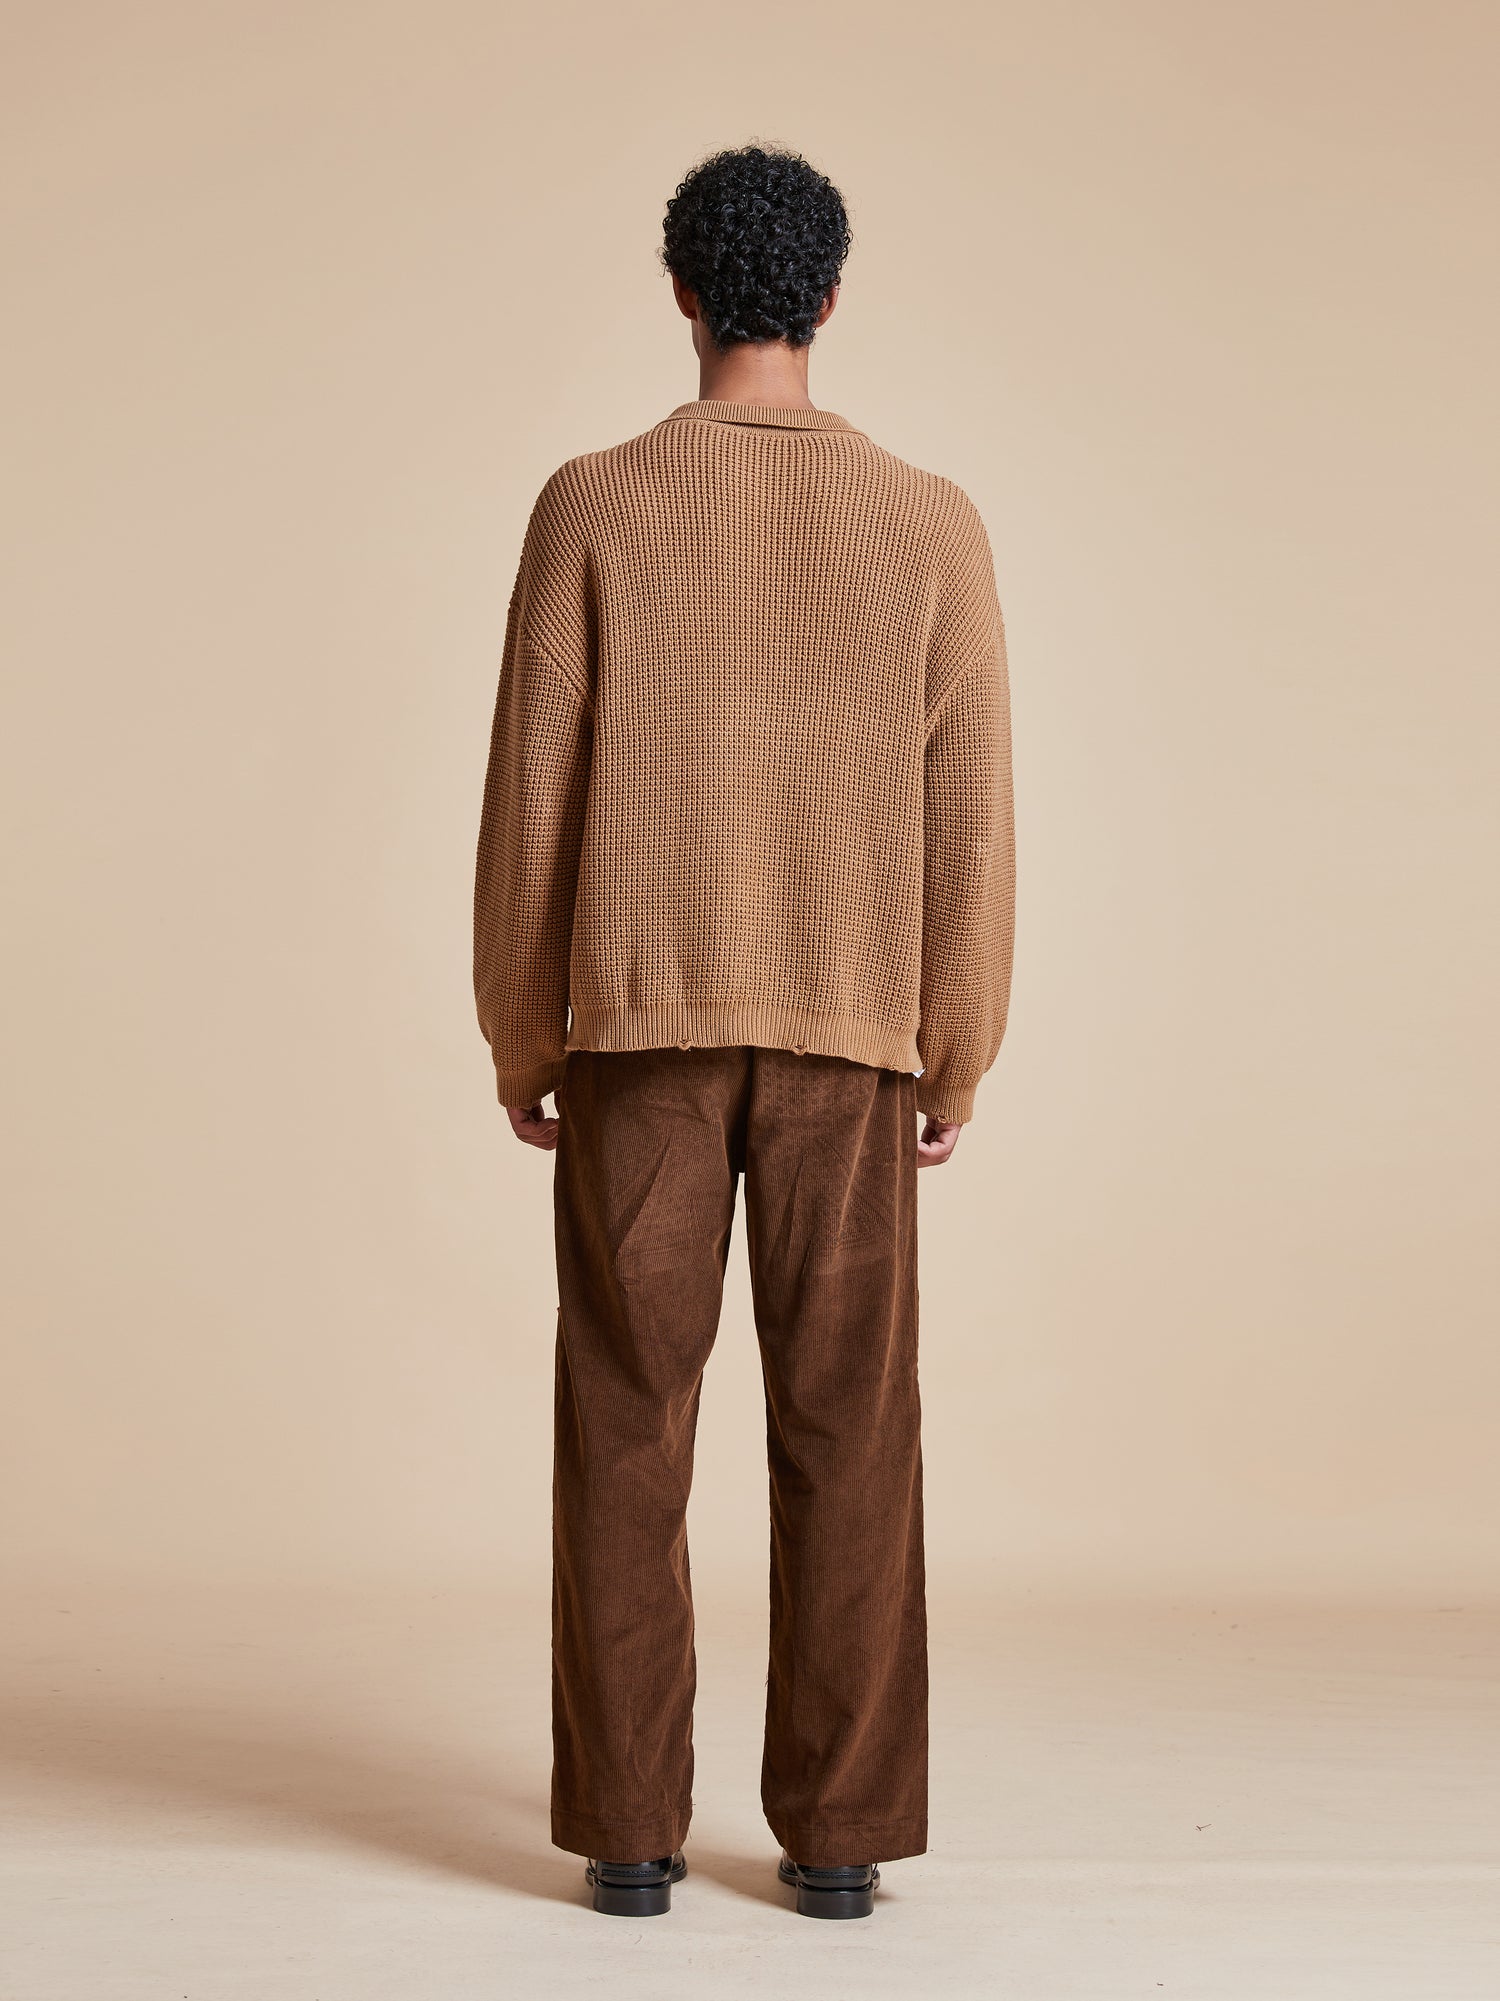 The back view of a man wearing a ginger-colored Found Tie-Collar Knit Sweater and corduroy pants, emanating a cozy feel.